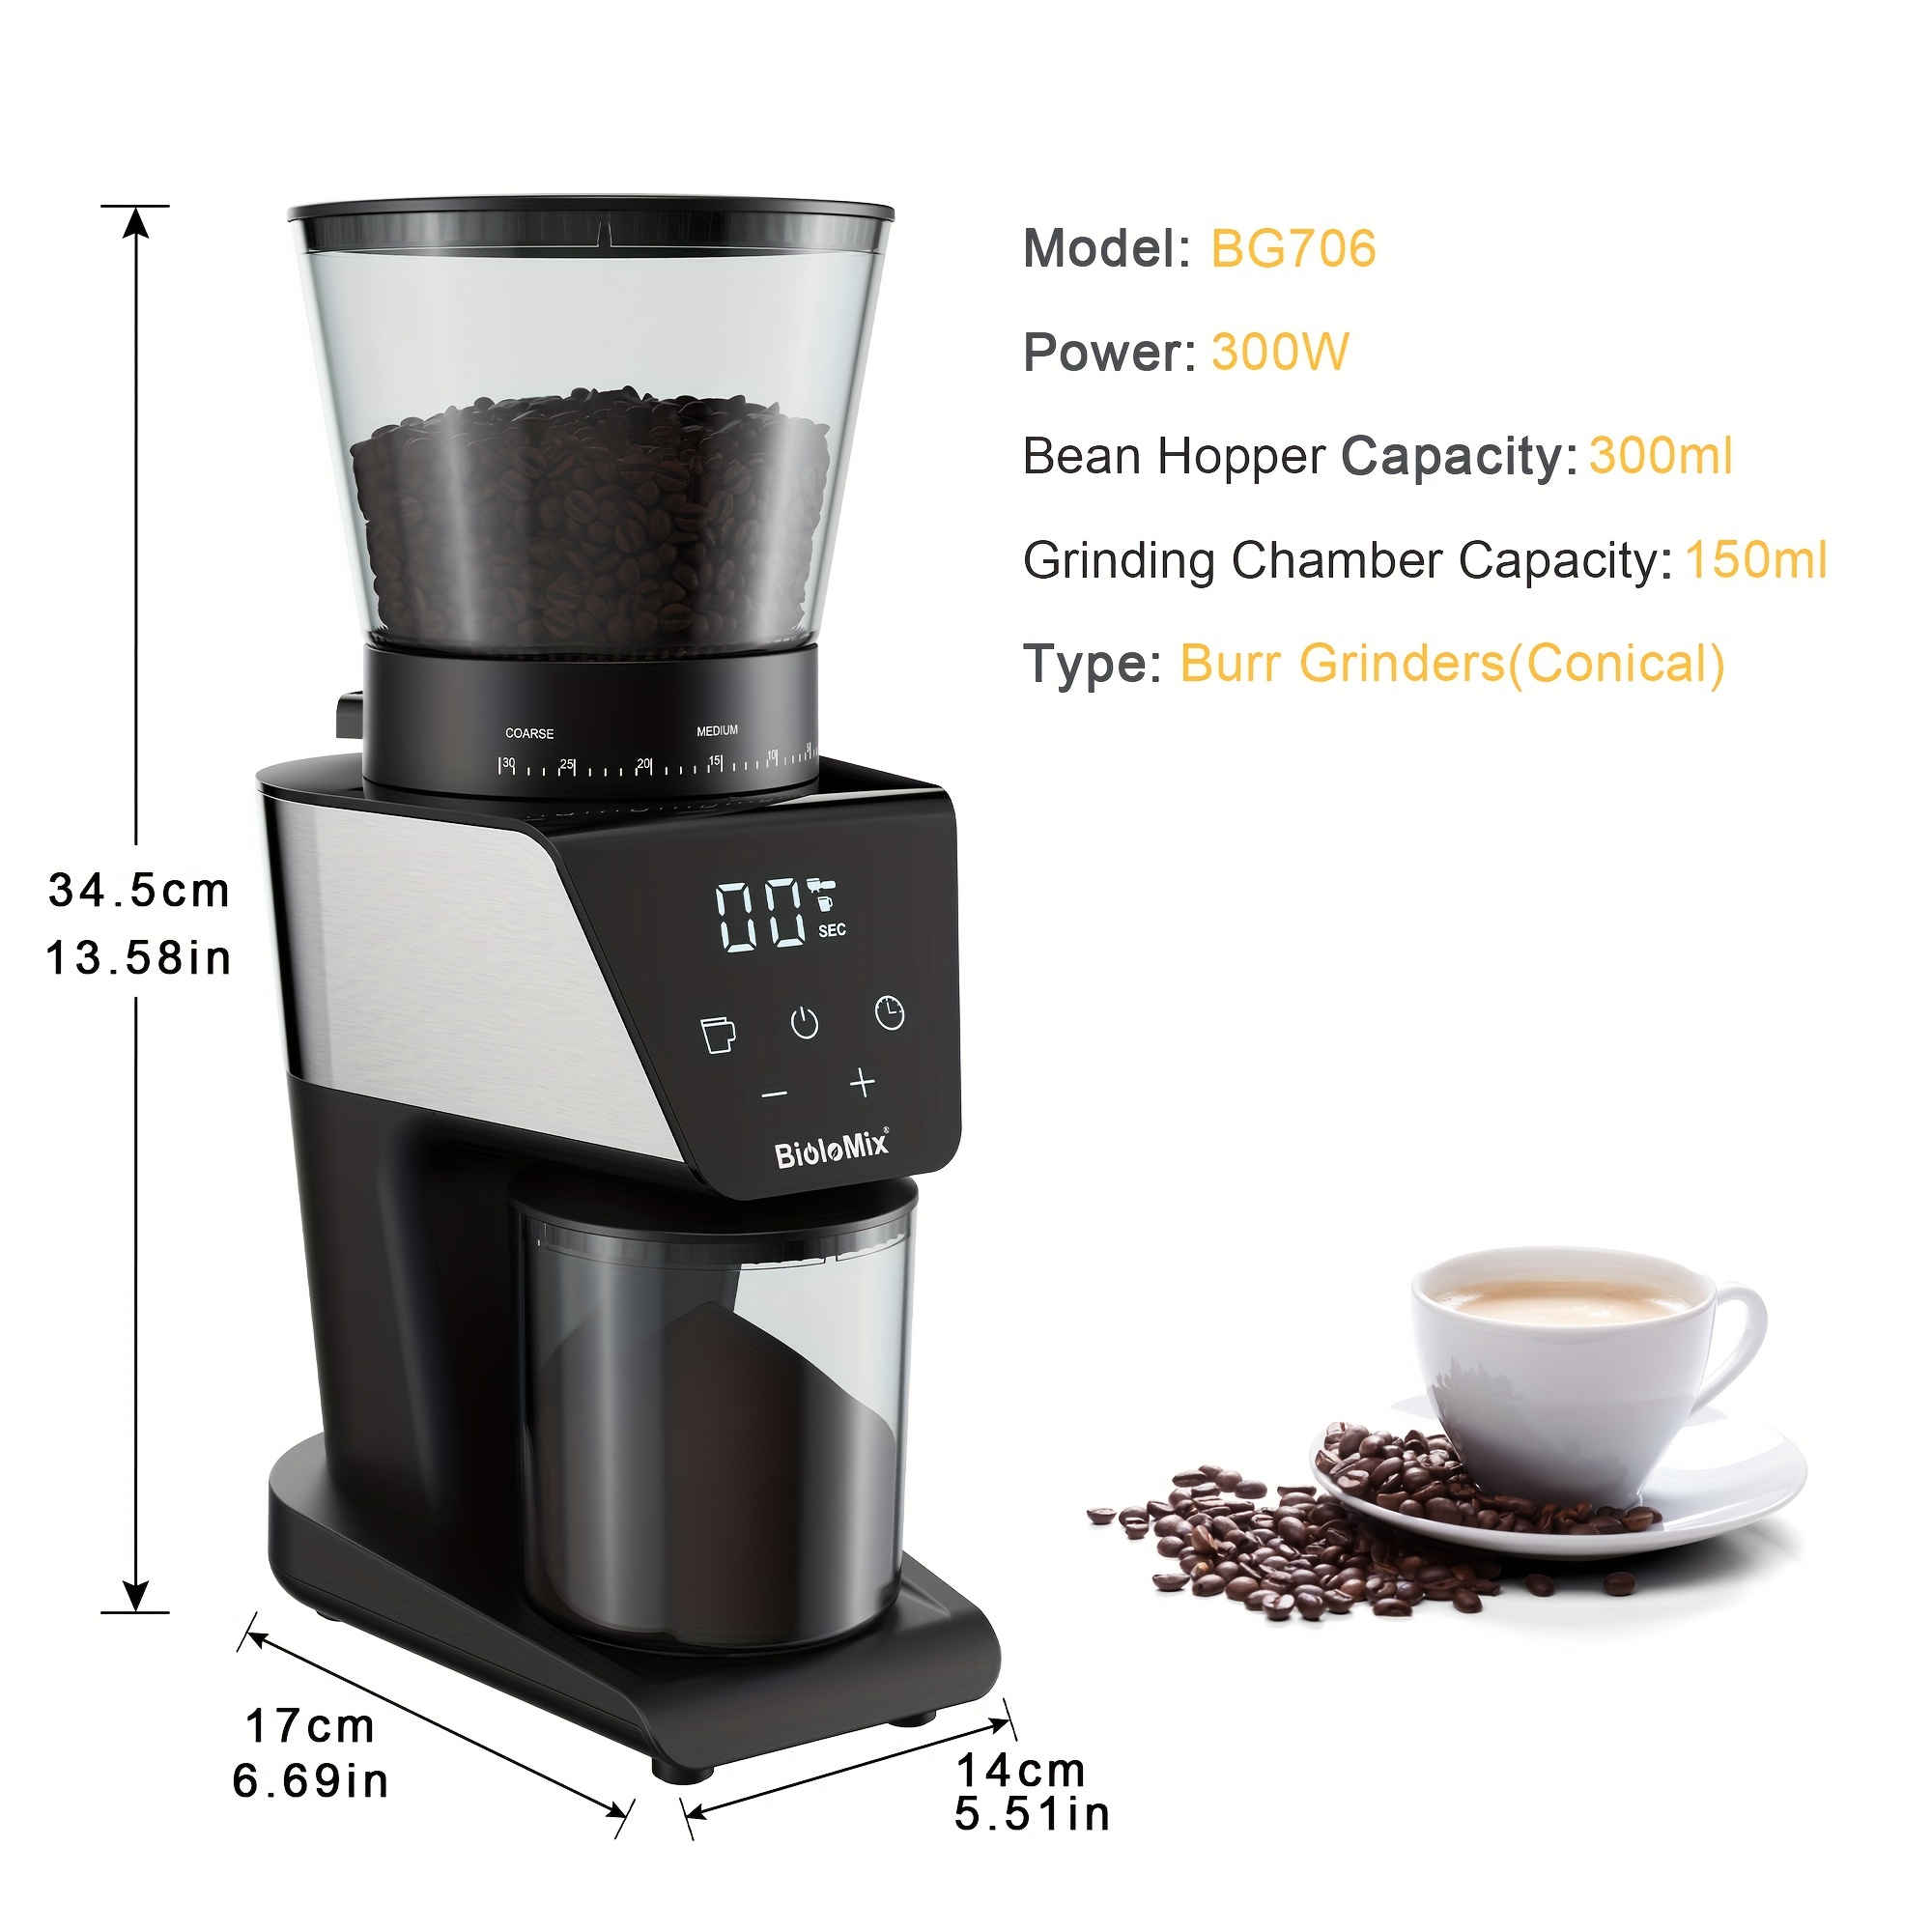 BioloMix Automatic Burr Mill Electric Coffee Grinder With 30 Gears For  Espresso American Coffee Pour Over Visual Bean Storage